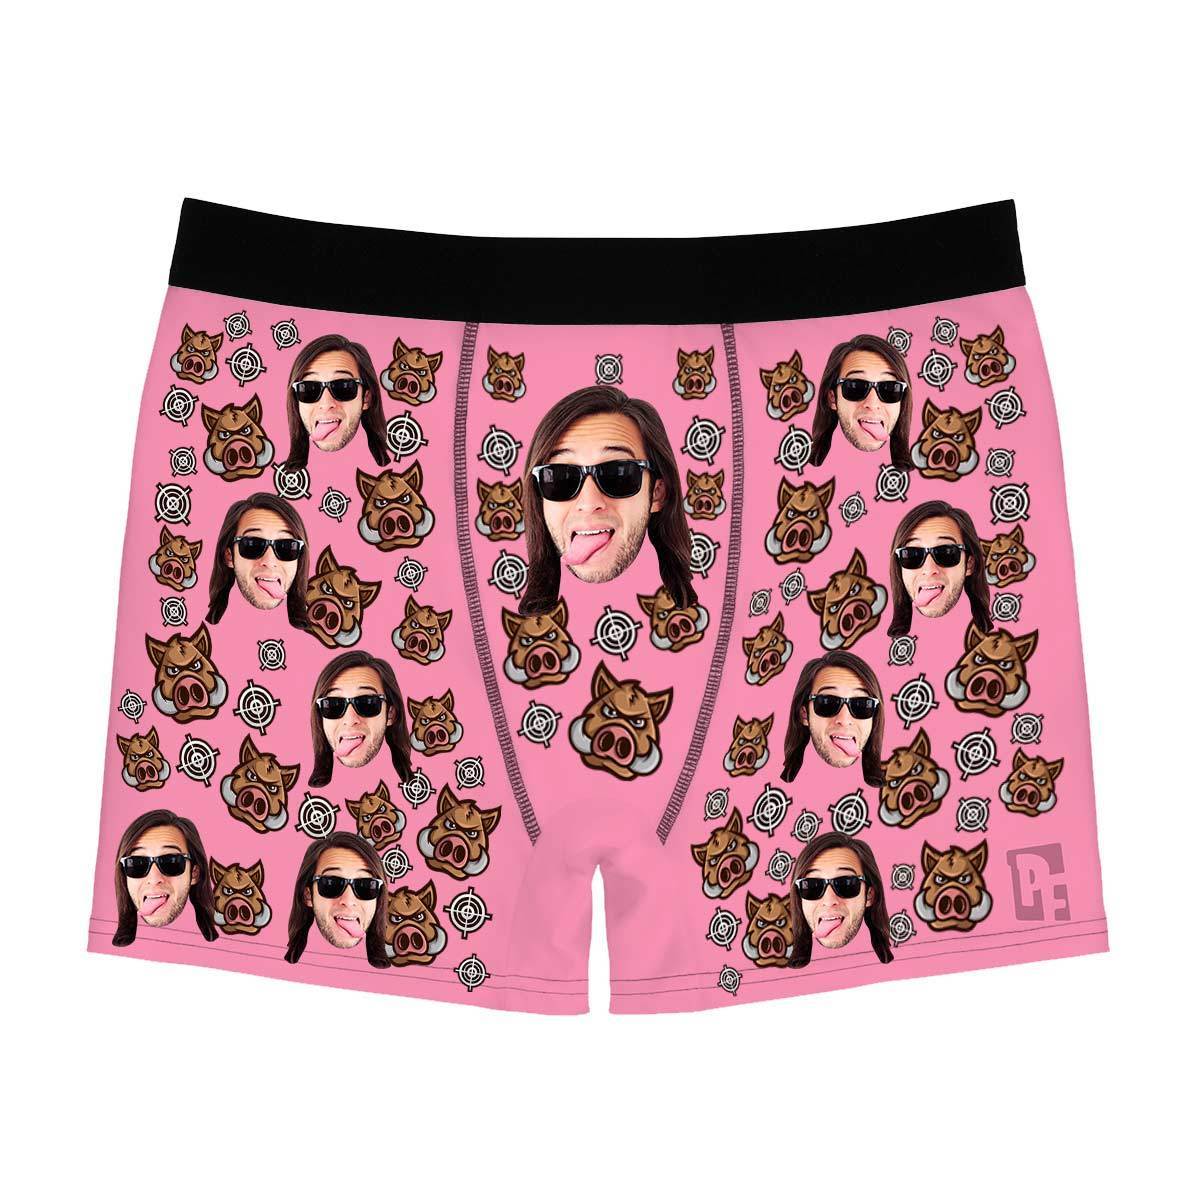 Pink Boar Hunter men's boxer briefs personalized with photo printed on them